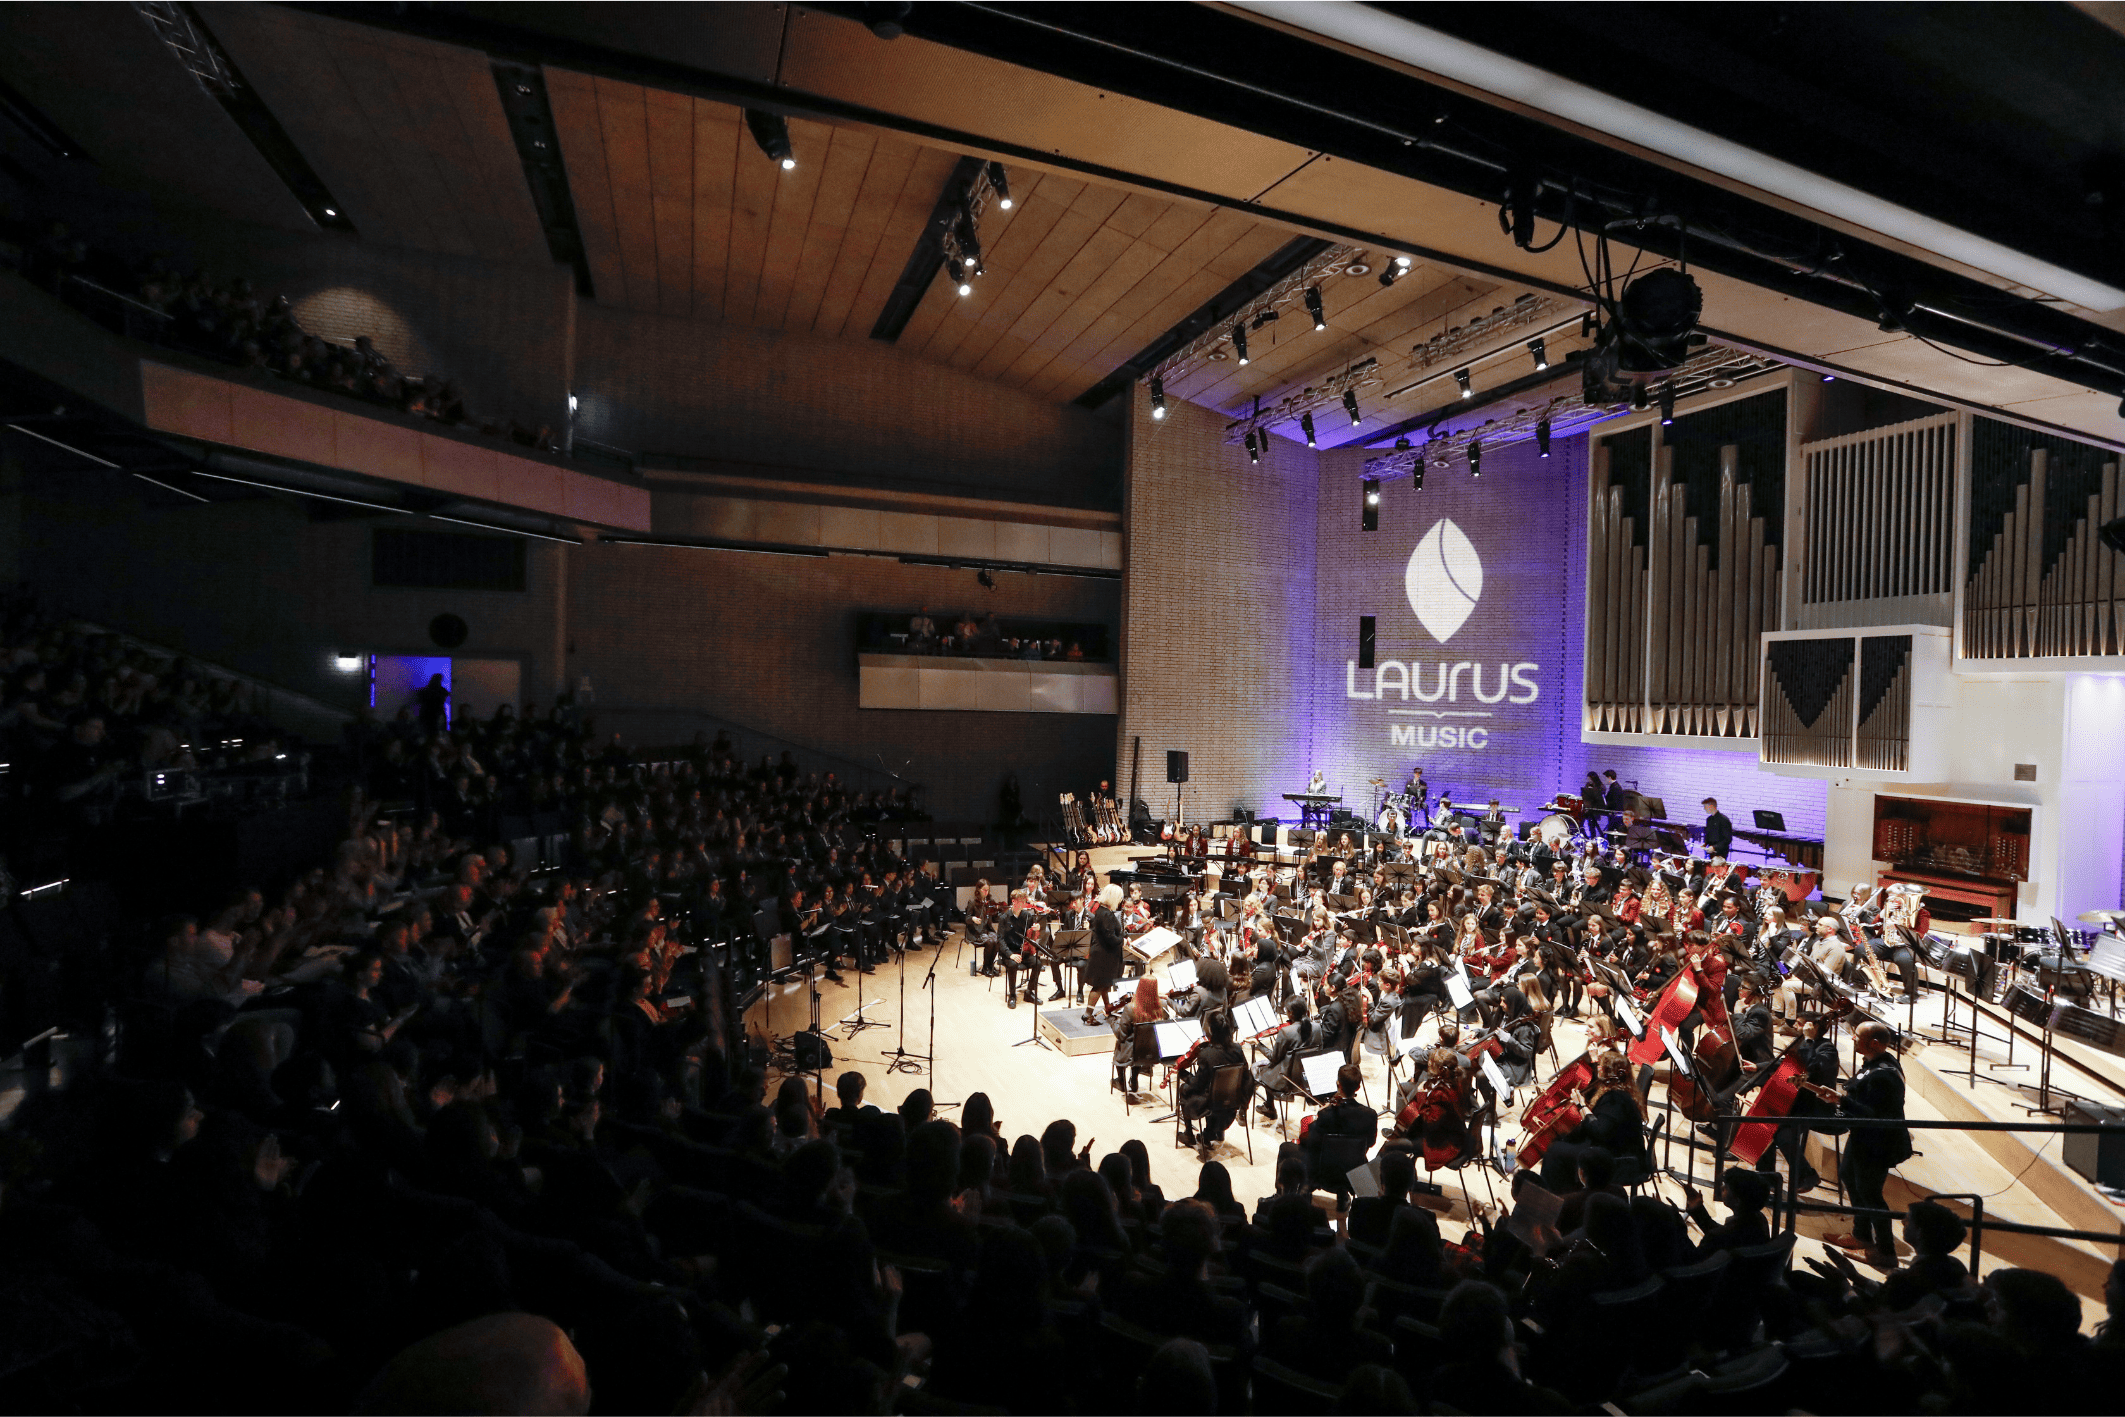 Students from Didsbury High School and the wider Laurus Trust came together at RNCM for Laurus Live. A wide shot shows the huge venue, the stage full of students and the audience.